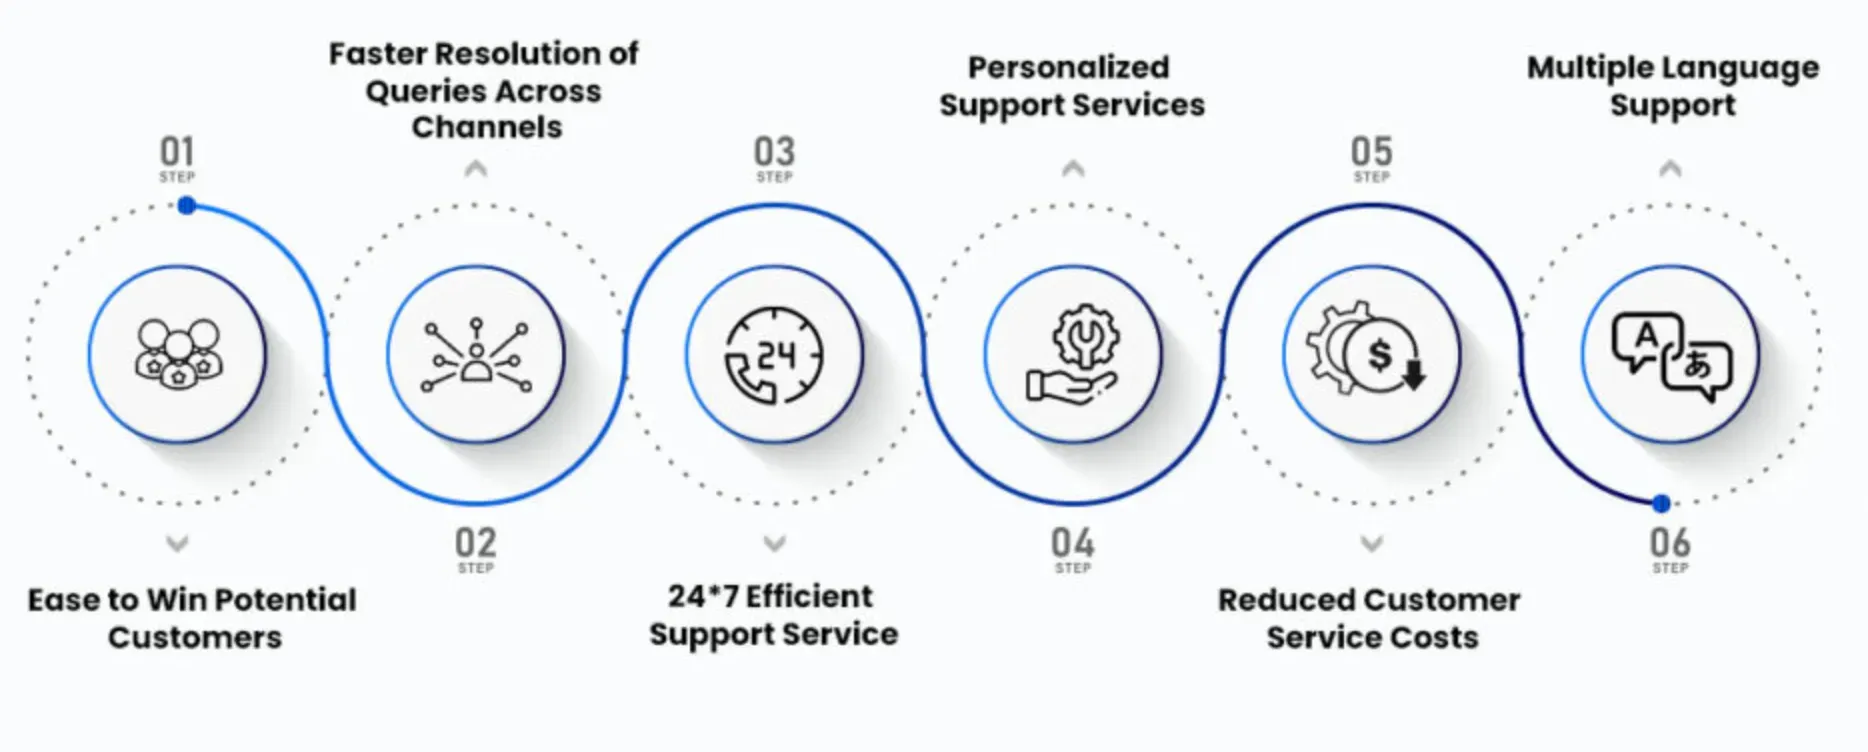 What are the benefits of using AI in customer service?